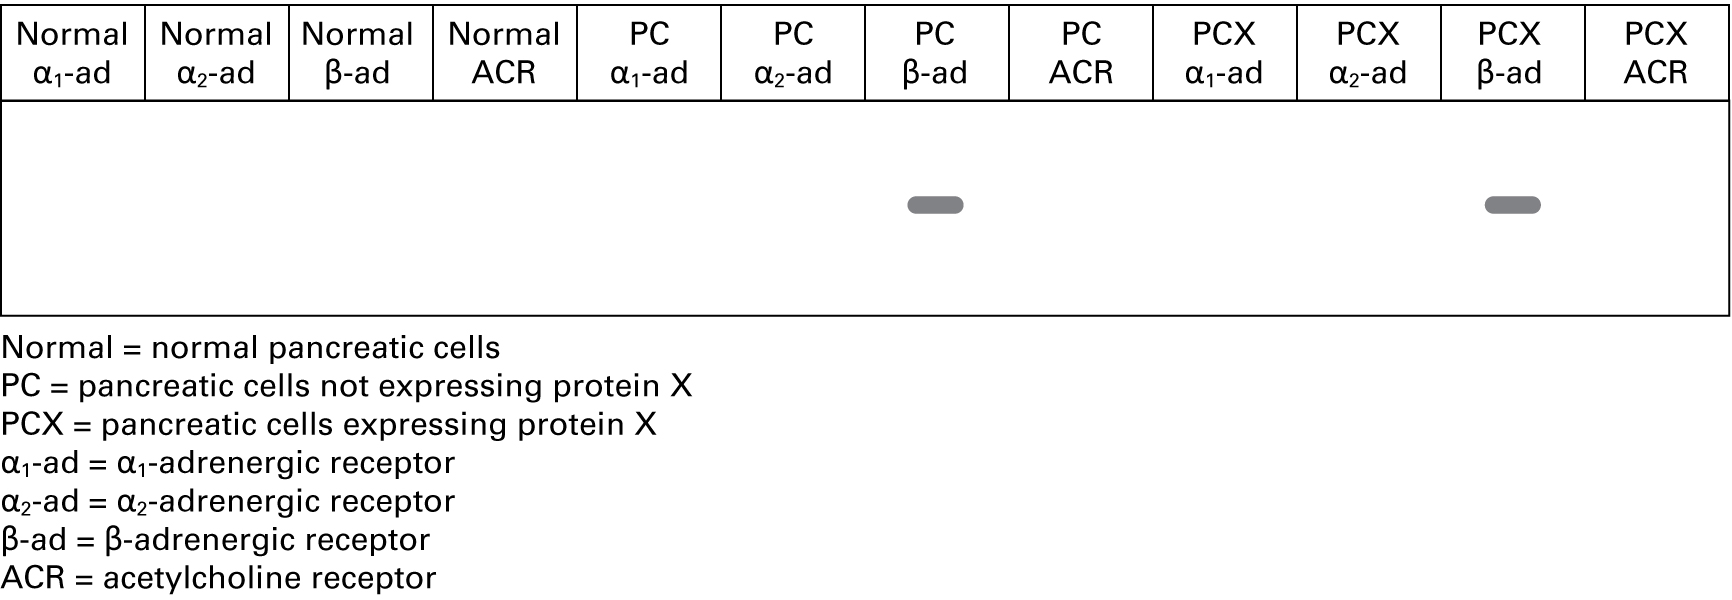 RT-PCR results show the following lanes and bands: Normal pancreatic cells and RT-PCR using primers for α1-adrenergic receptor: no band Normal pancreatic cells and RT-PCR using primers for α2-adrenergic receptor: no band Normal pancreatic cells and RT-PCR using primers for β-adrenergic receptor: no band Normal pancreatic cells and RT-PCR using primers for acetylcholine receptor: no band Pancreatic cells not expressing protein X and RT-PCR using primers for α1-adrenergic receptor: no band Pancreatic cells not expressing protein X and RT-PCR using primers for α2-adrenergic receptor: no band Pancreatic cells not expressing protein X and RT-PCR using primers for β-adrenergic receptor: band Pancreatic cells not expressing protein X and RT-PCR using primers for acetylcholine receptor: no band Pancreatic cells expressing protein X and RT-PCR using primers for α1-adrenergic receptor: no band Pancreatic cells expressing protein X and RT-PCR using primers for α2-adrenergic receptor: no band Pancreatic cells expressing protein X and RT-PCR using primers for β-adrenergic receptor: band Pancreatic cells expressing protein X and RT-PCR using primers for acetylcholine receptor: no band 